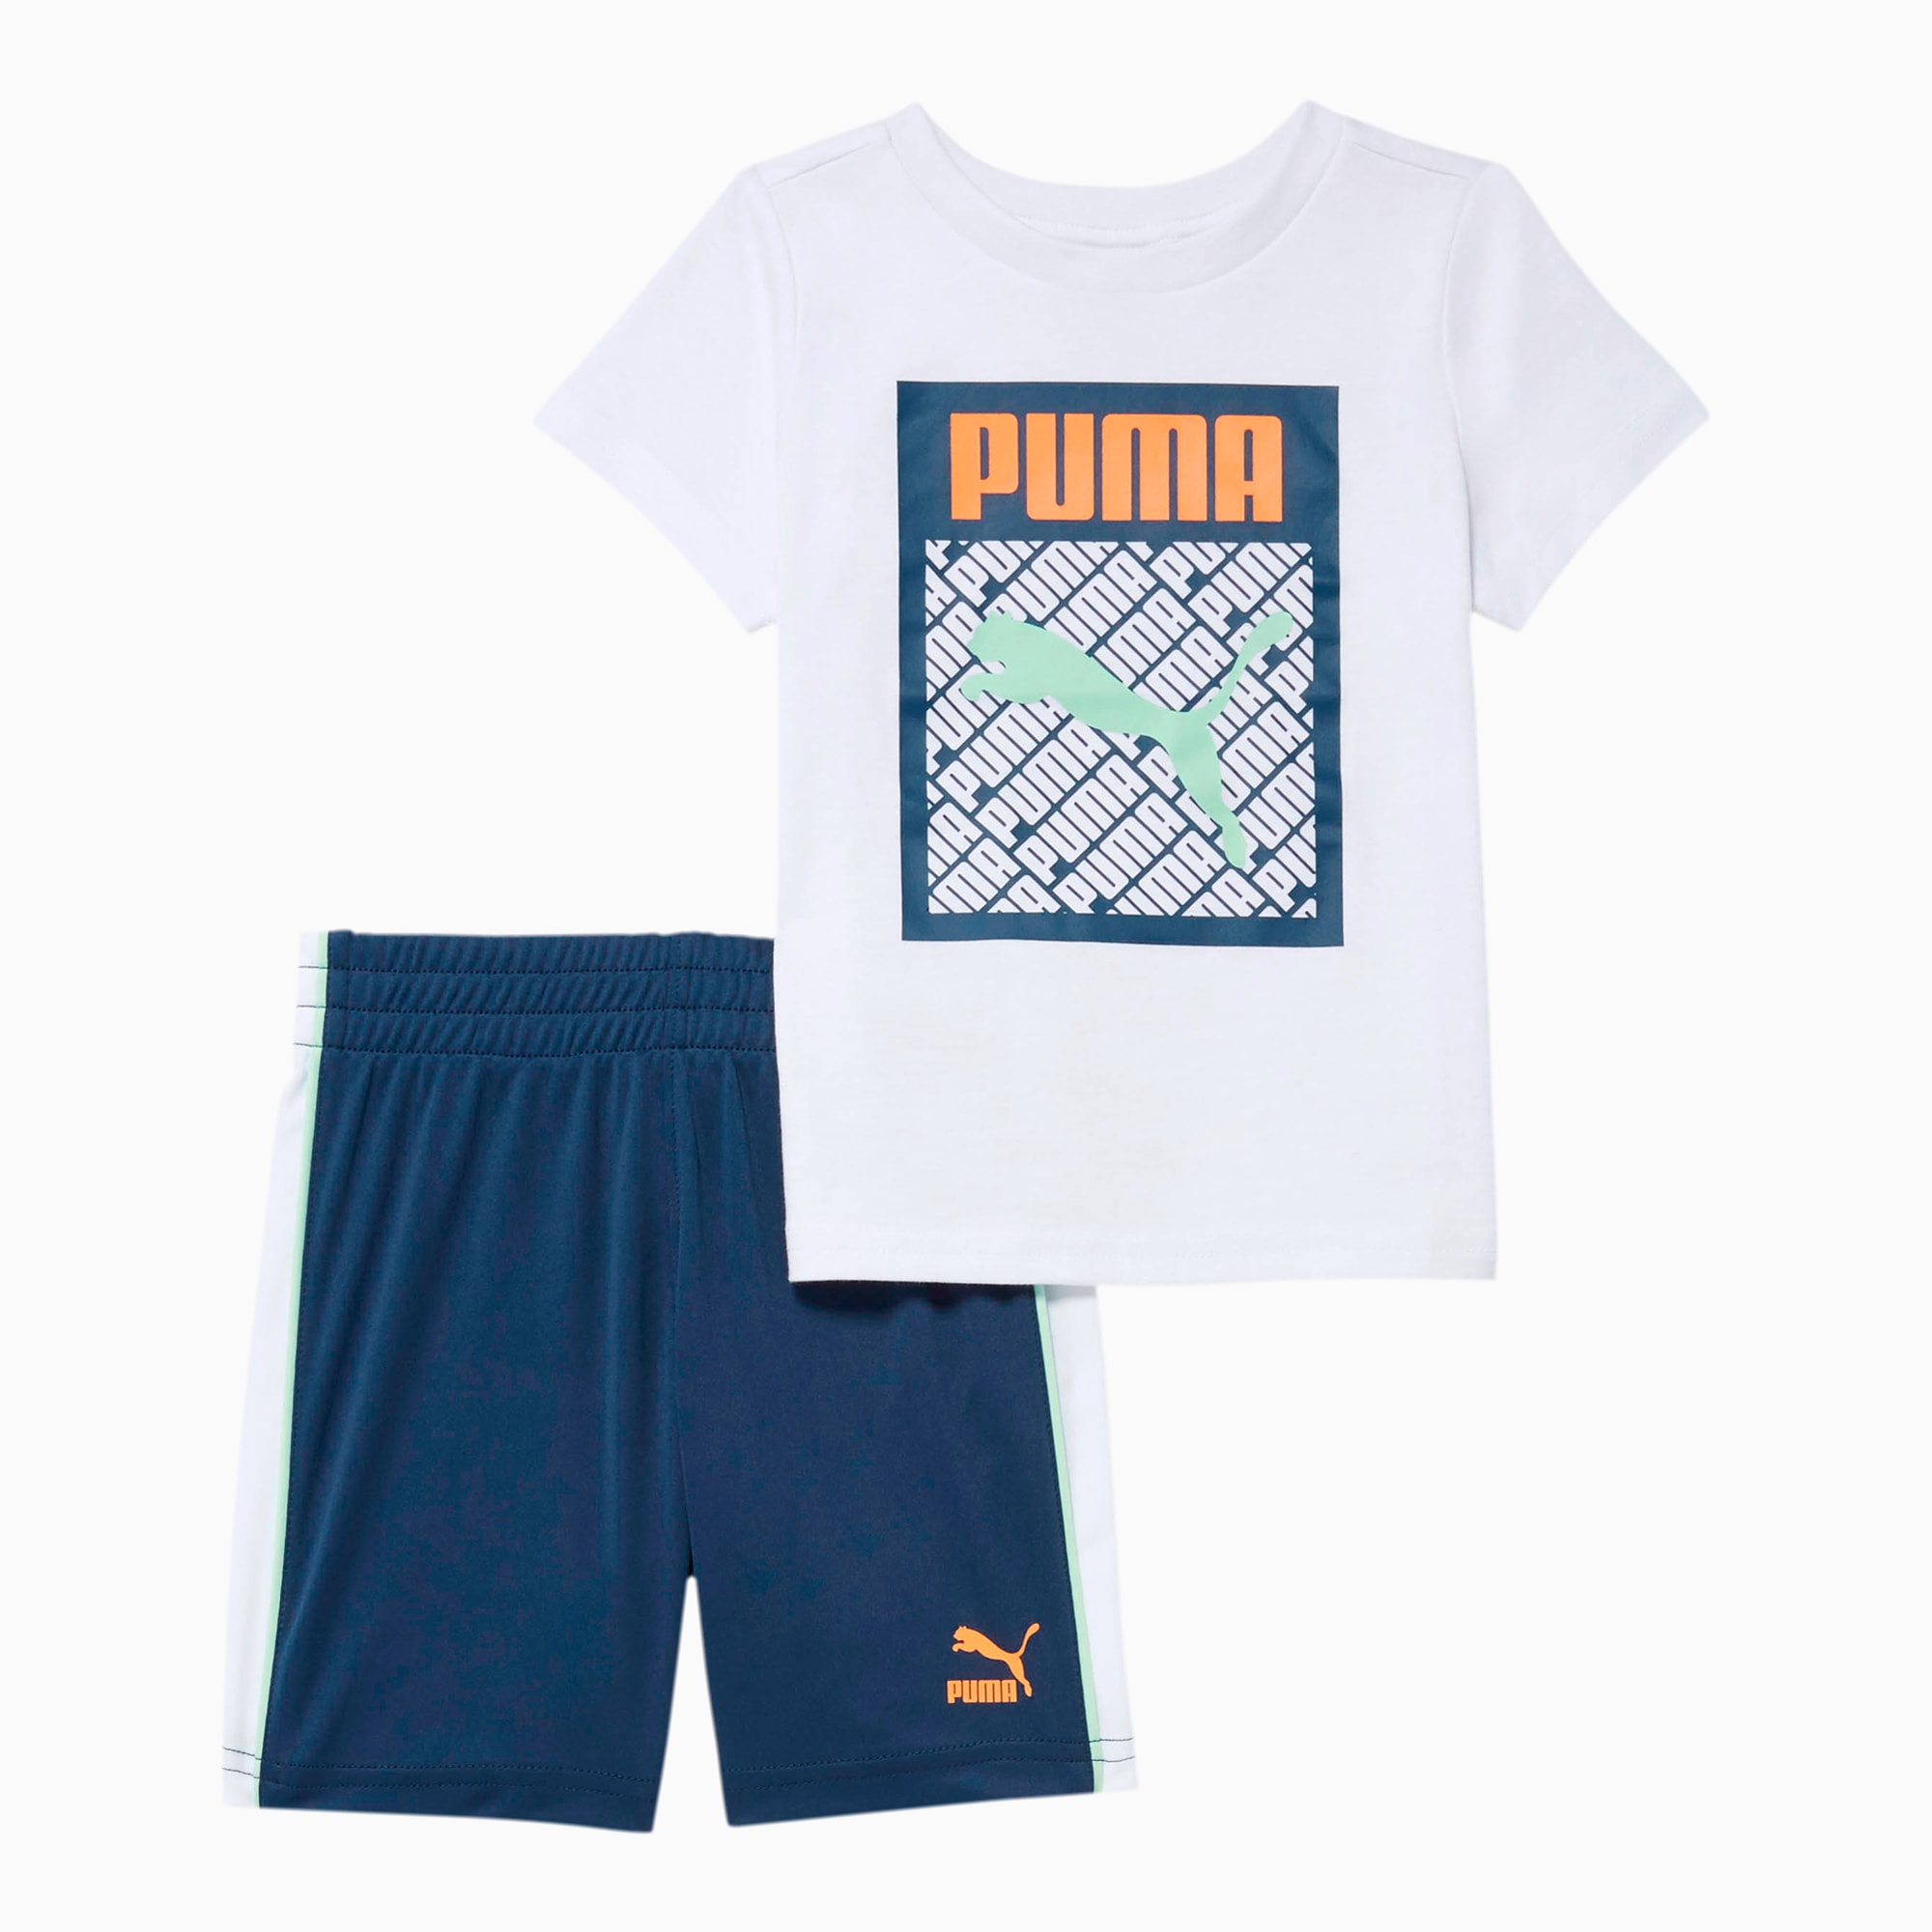 puma two piece outfit